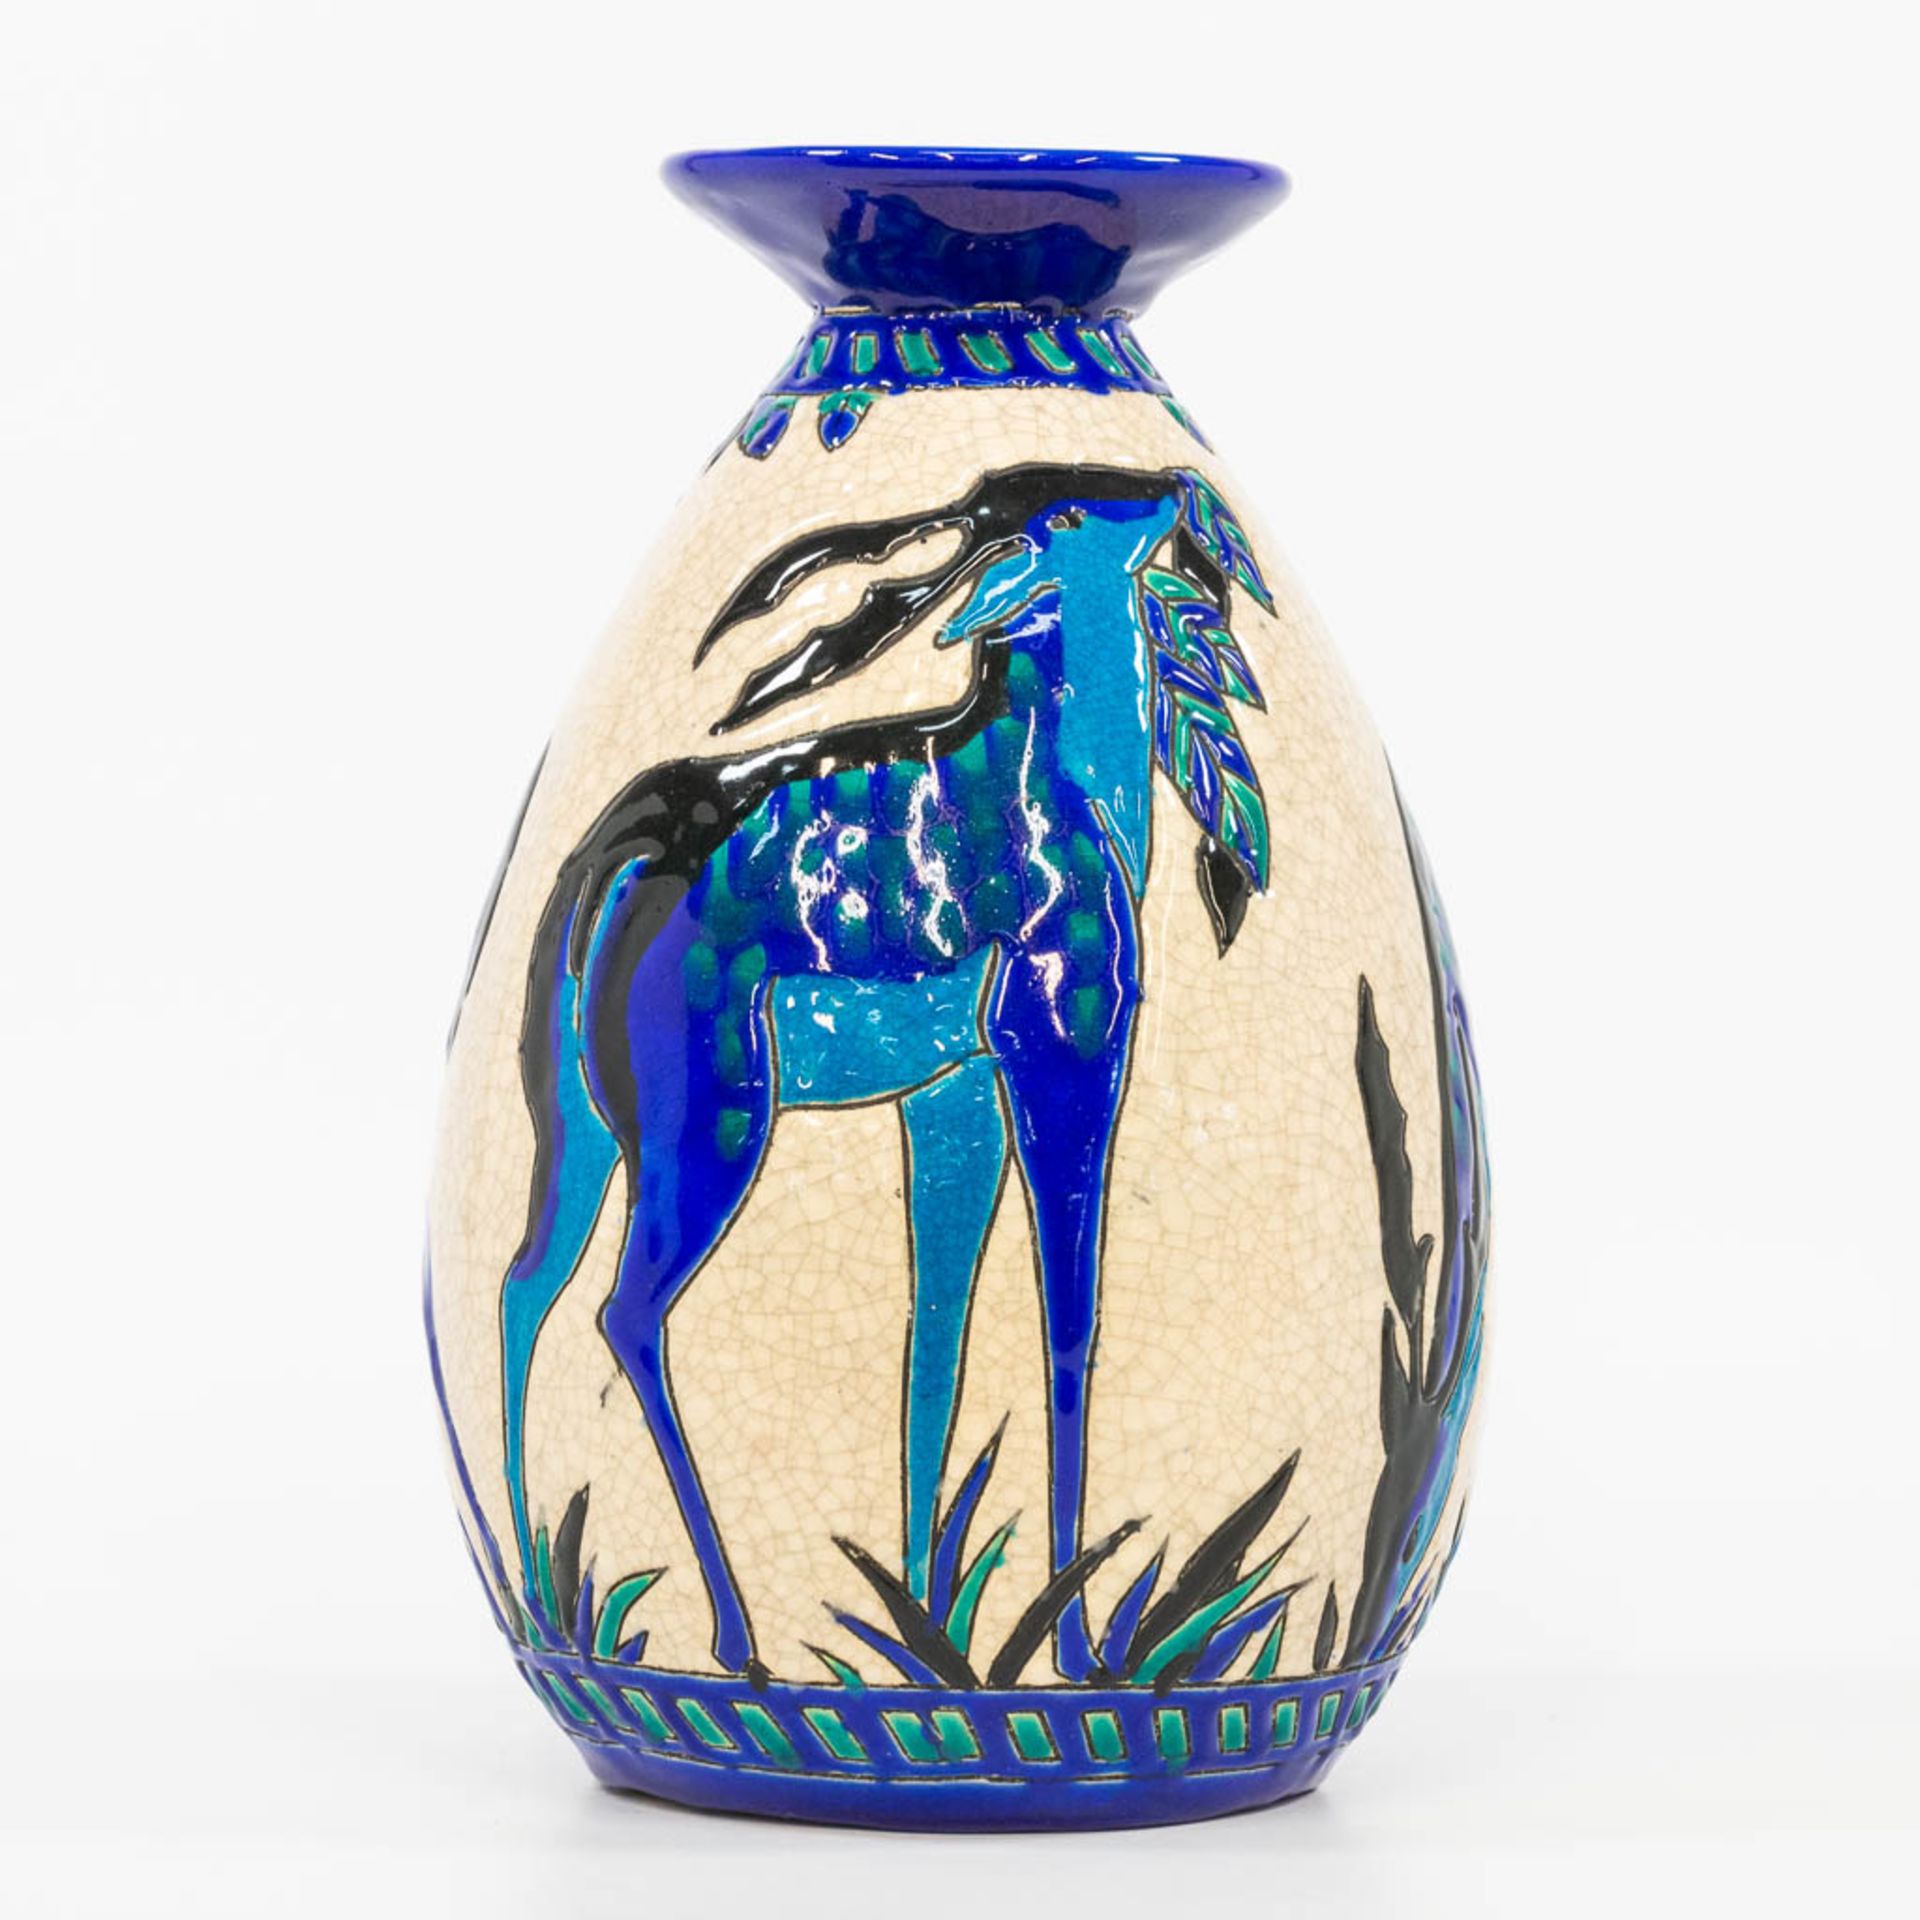 Charles CATTEAU (1880-1966) a glazed ceramic vase with decor 943 and made by Boch. (26,5 x 17 cm)